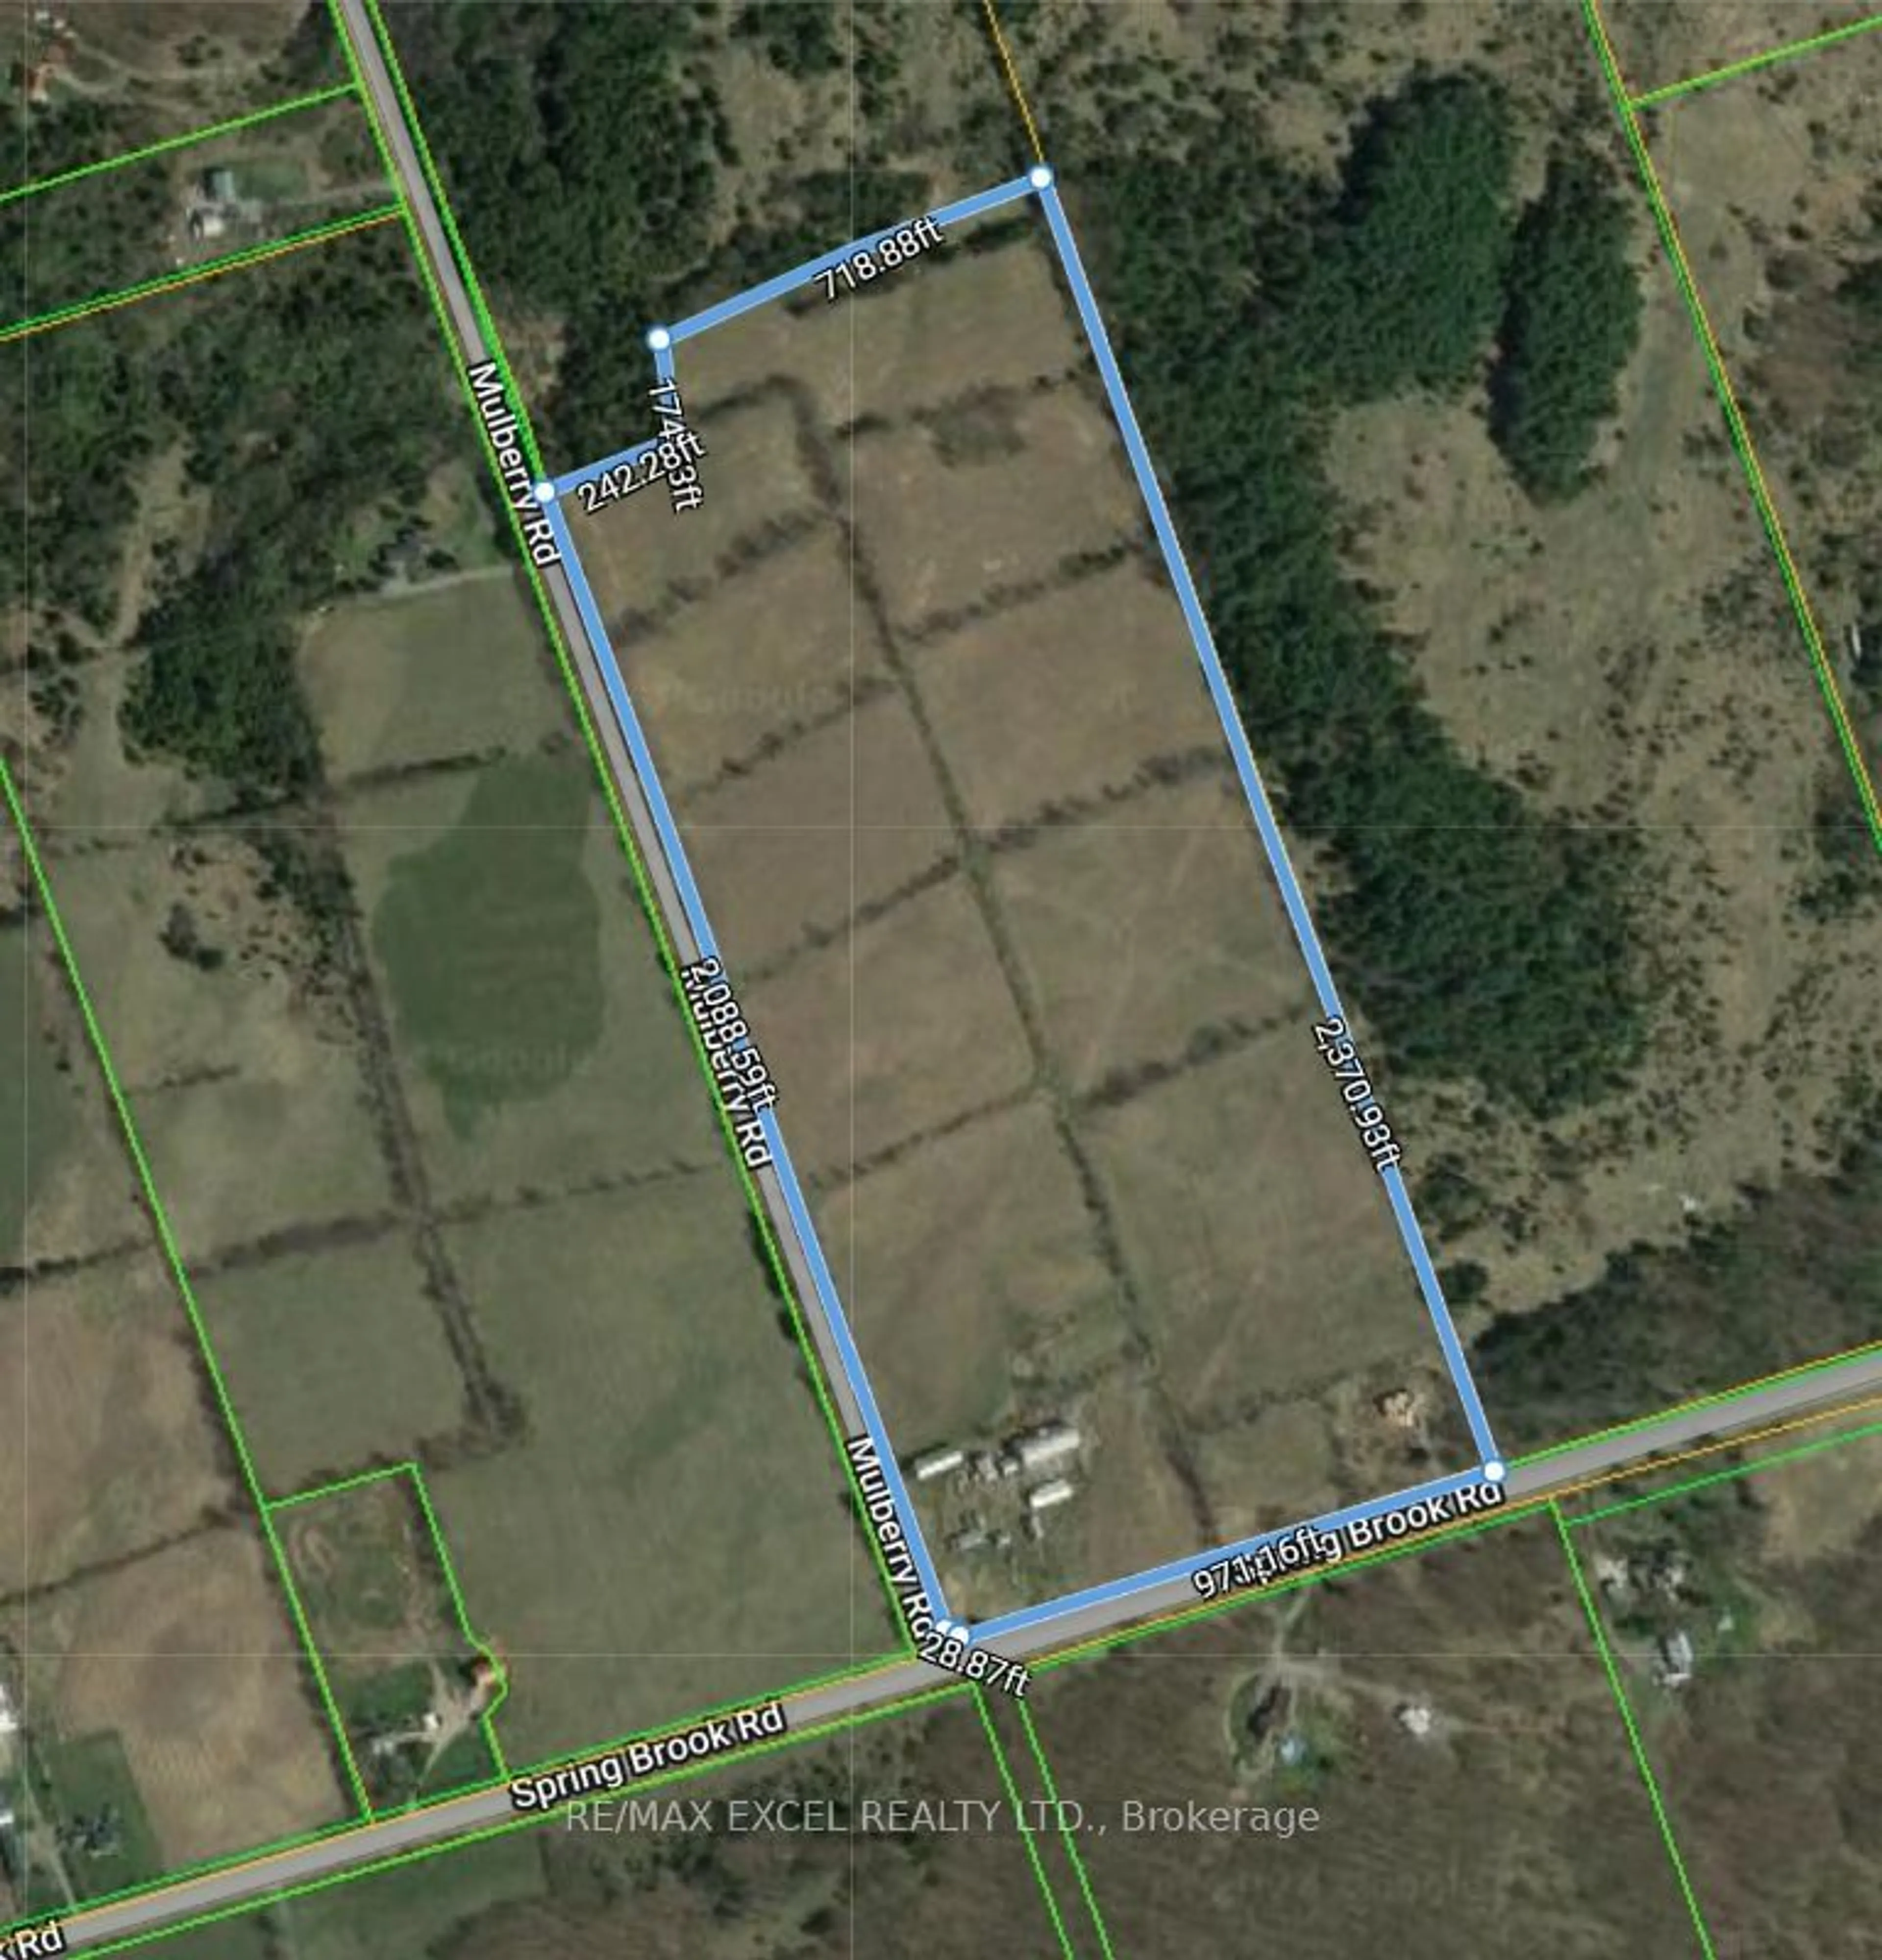 Picture of a map for 1762 Springbrook Rd, Stirling-Rawdon Ontario K0K 3C0